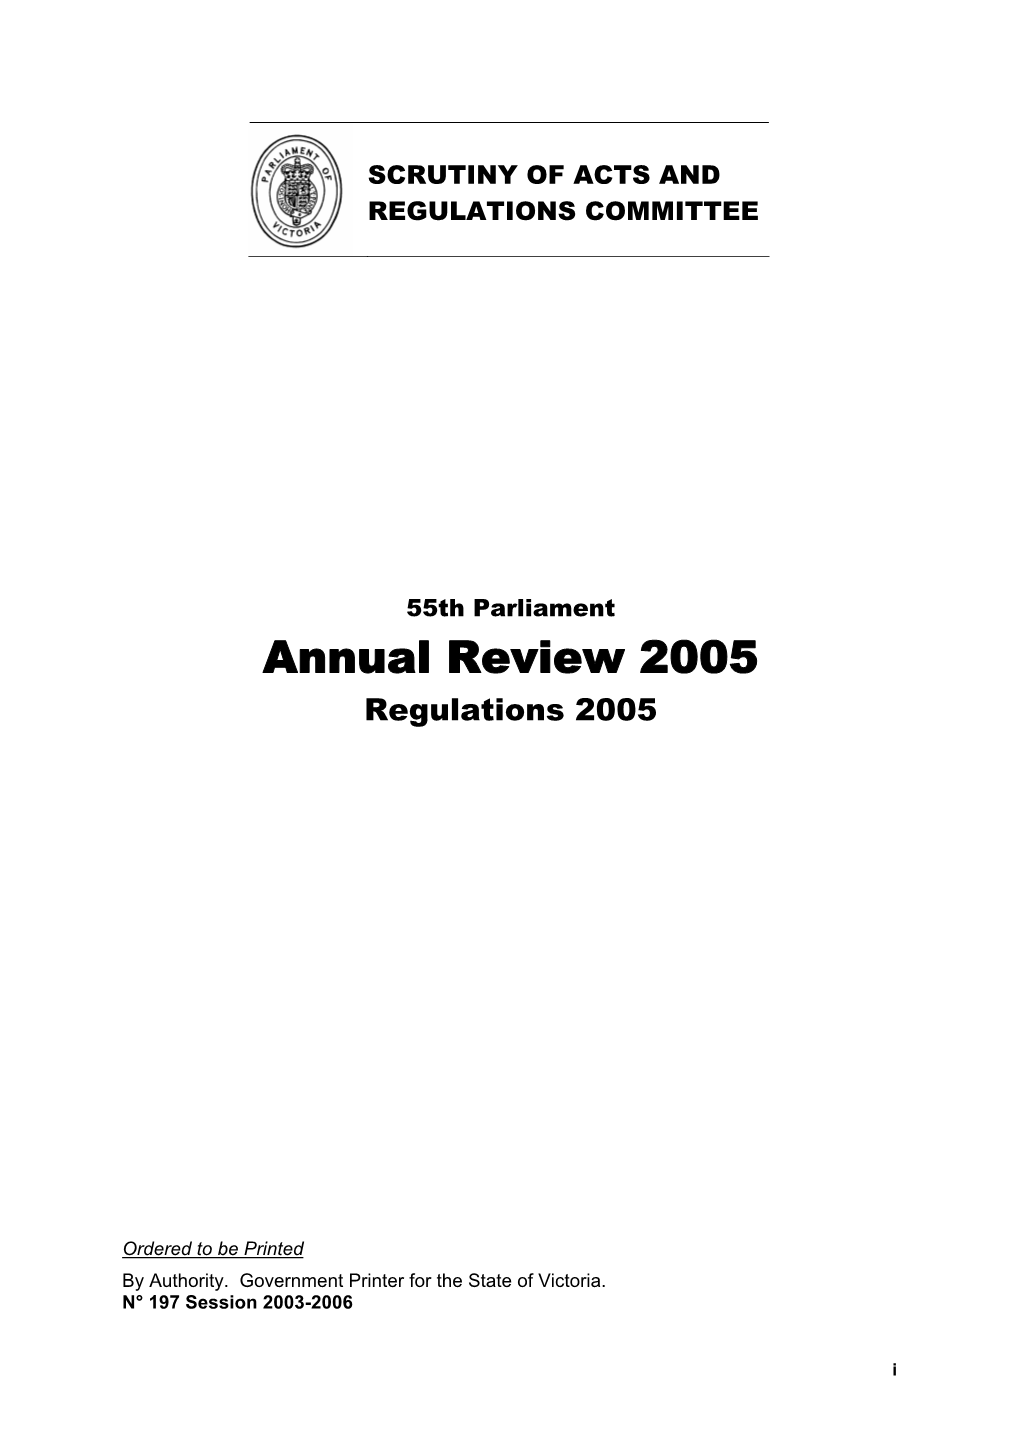 Annual Review 2005 Regulations 2005